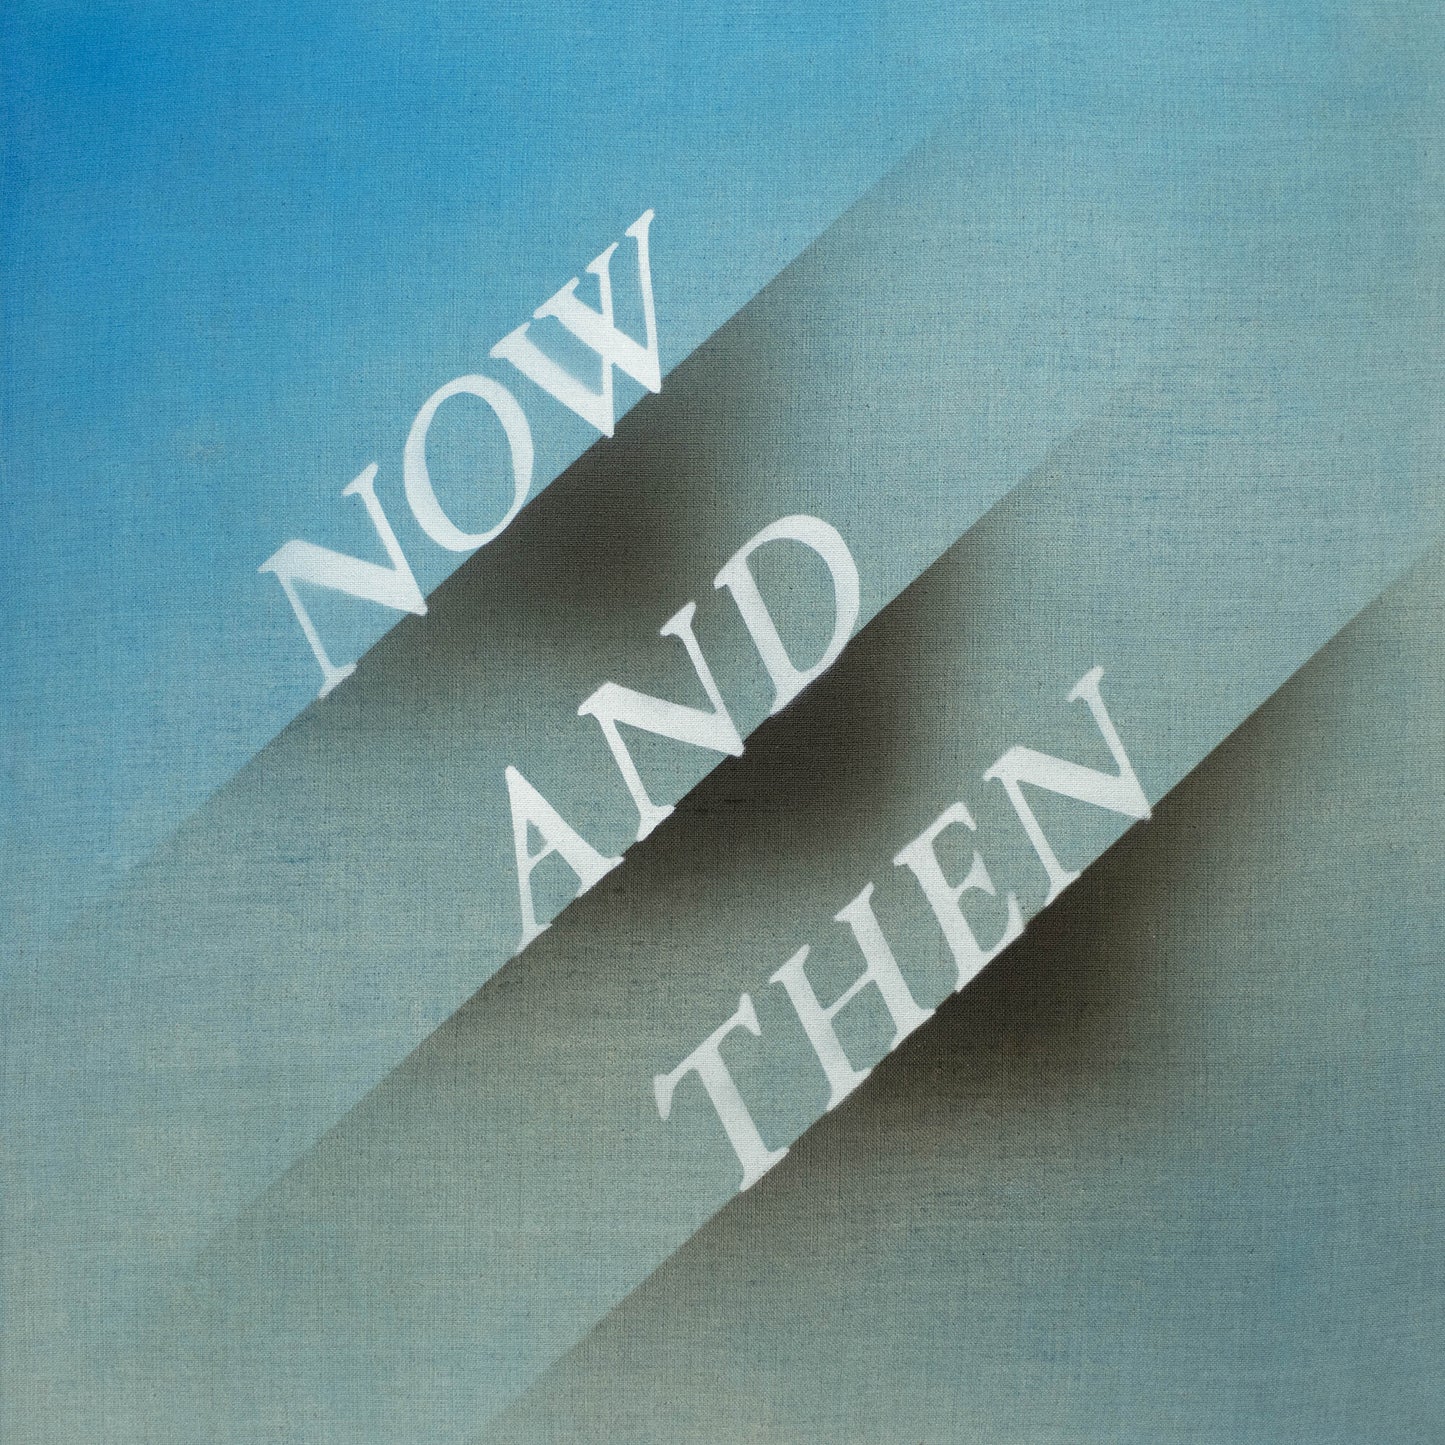 The Beatles - Now and Then - 12" Single